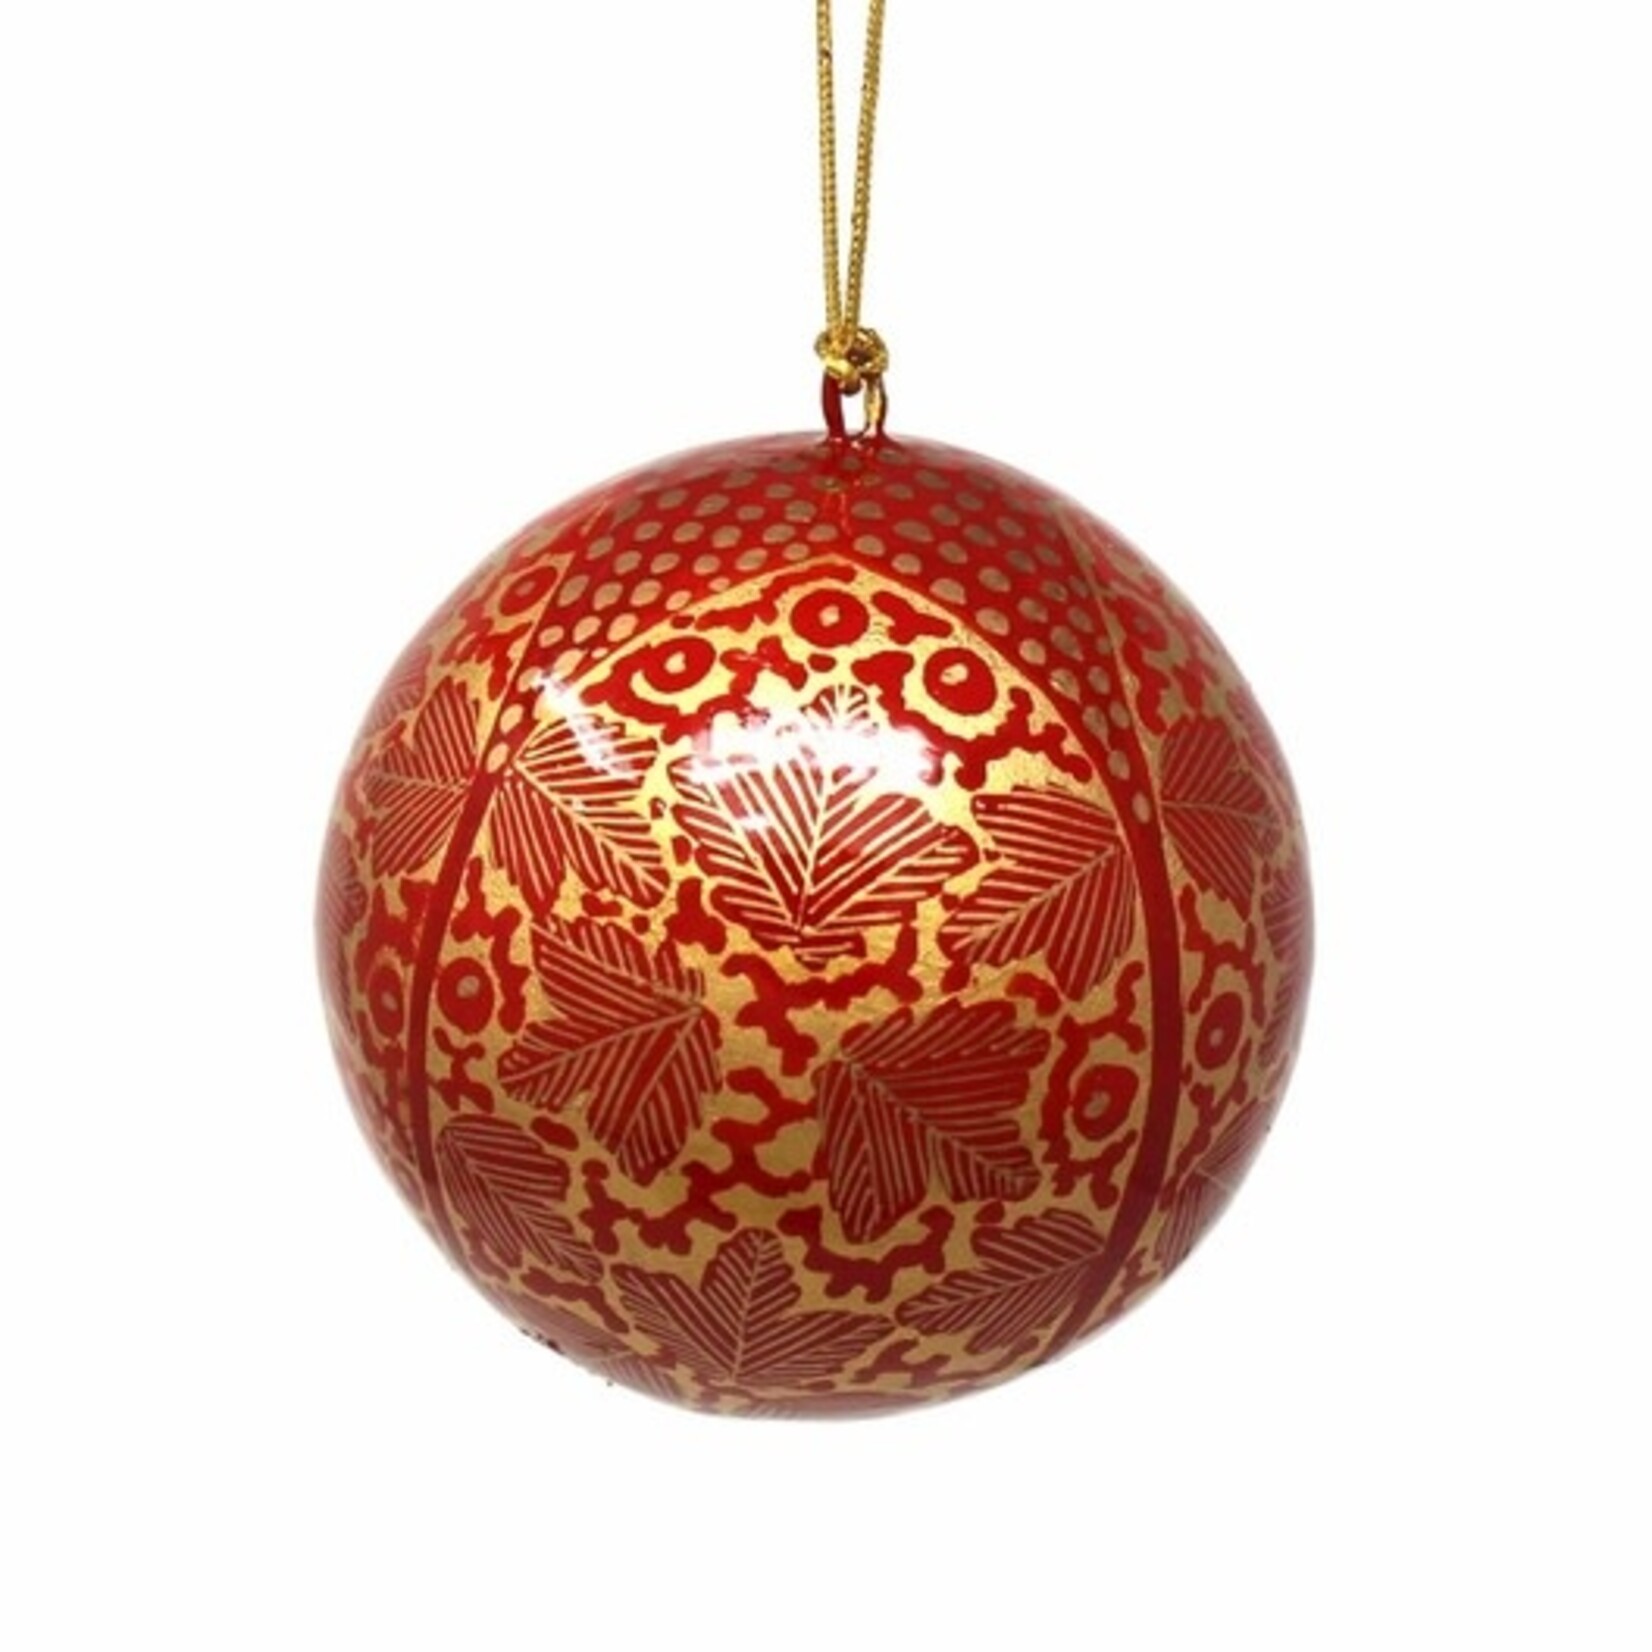 Global Crafts Handpainted Ball Ornament Gold Chinar Leaves, India